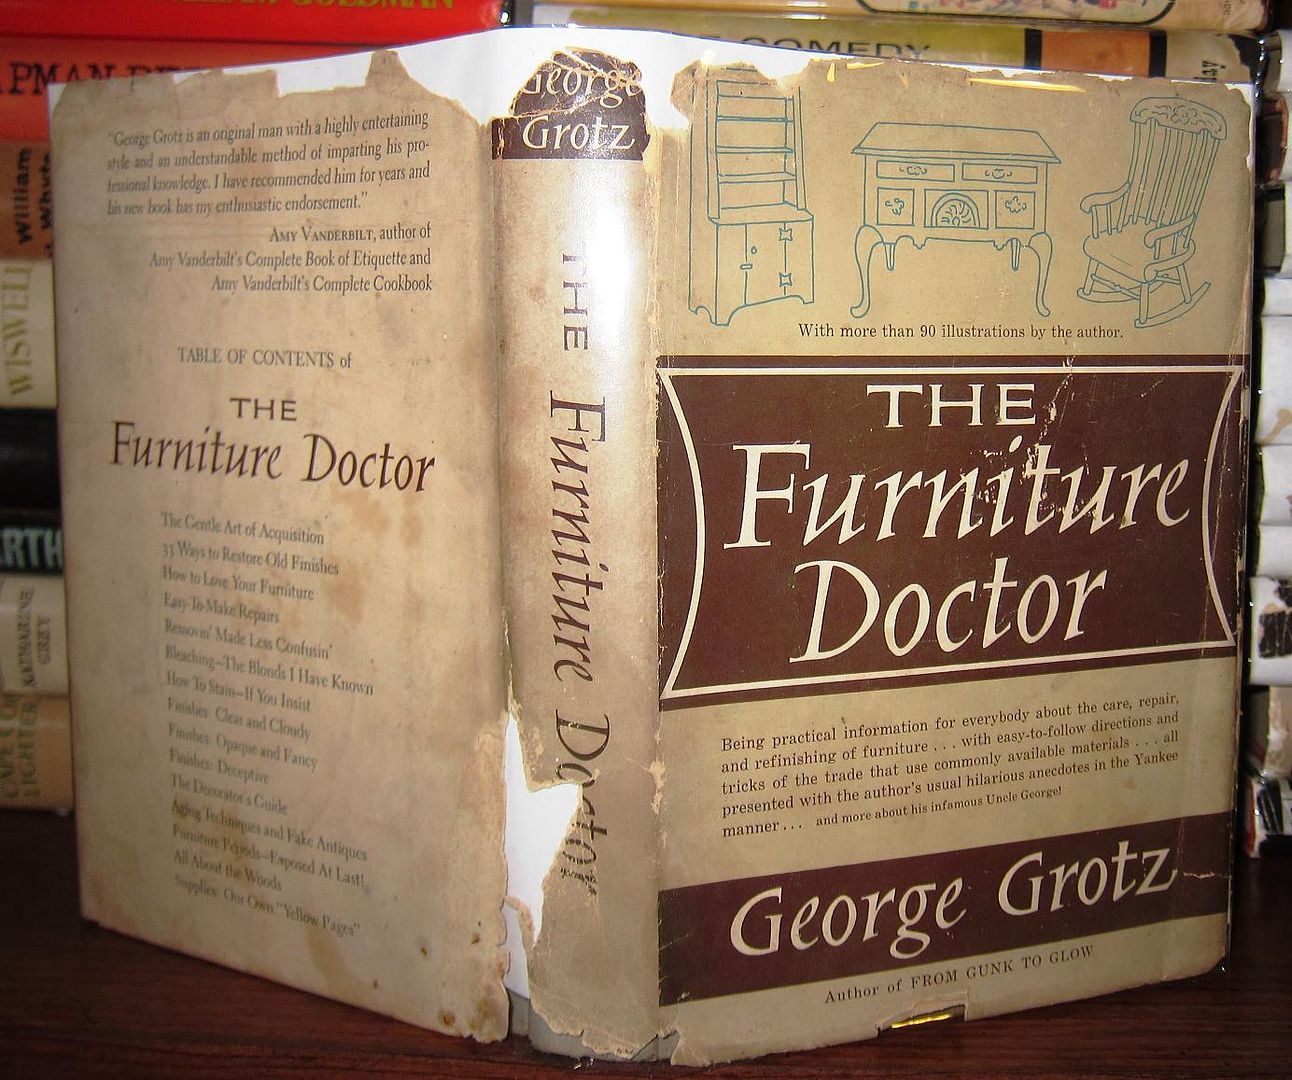 GROTZ, GEORGE - The Furniture Doctor